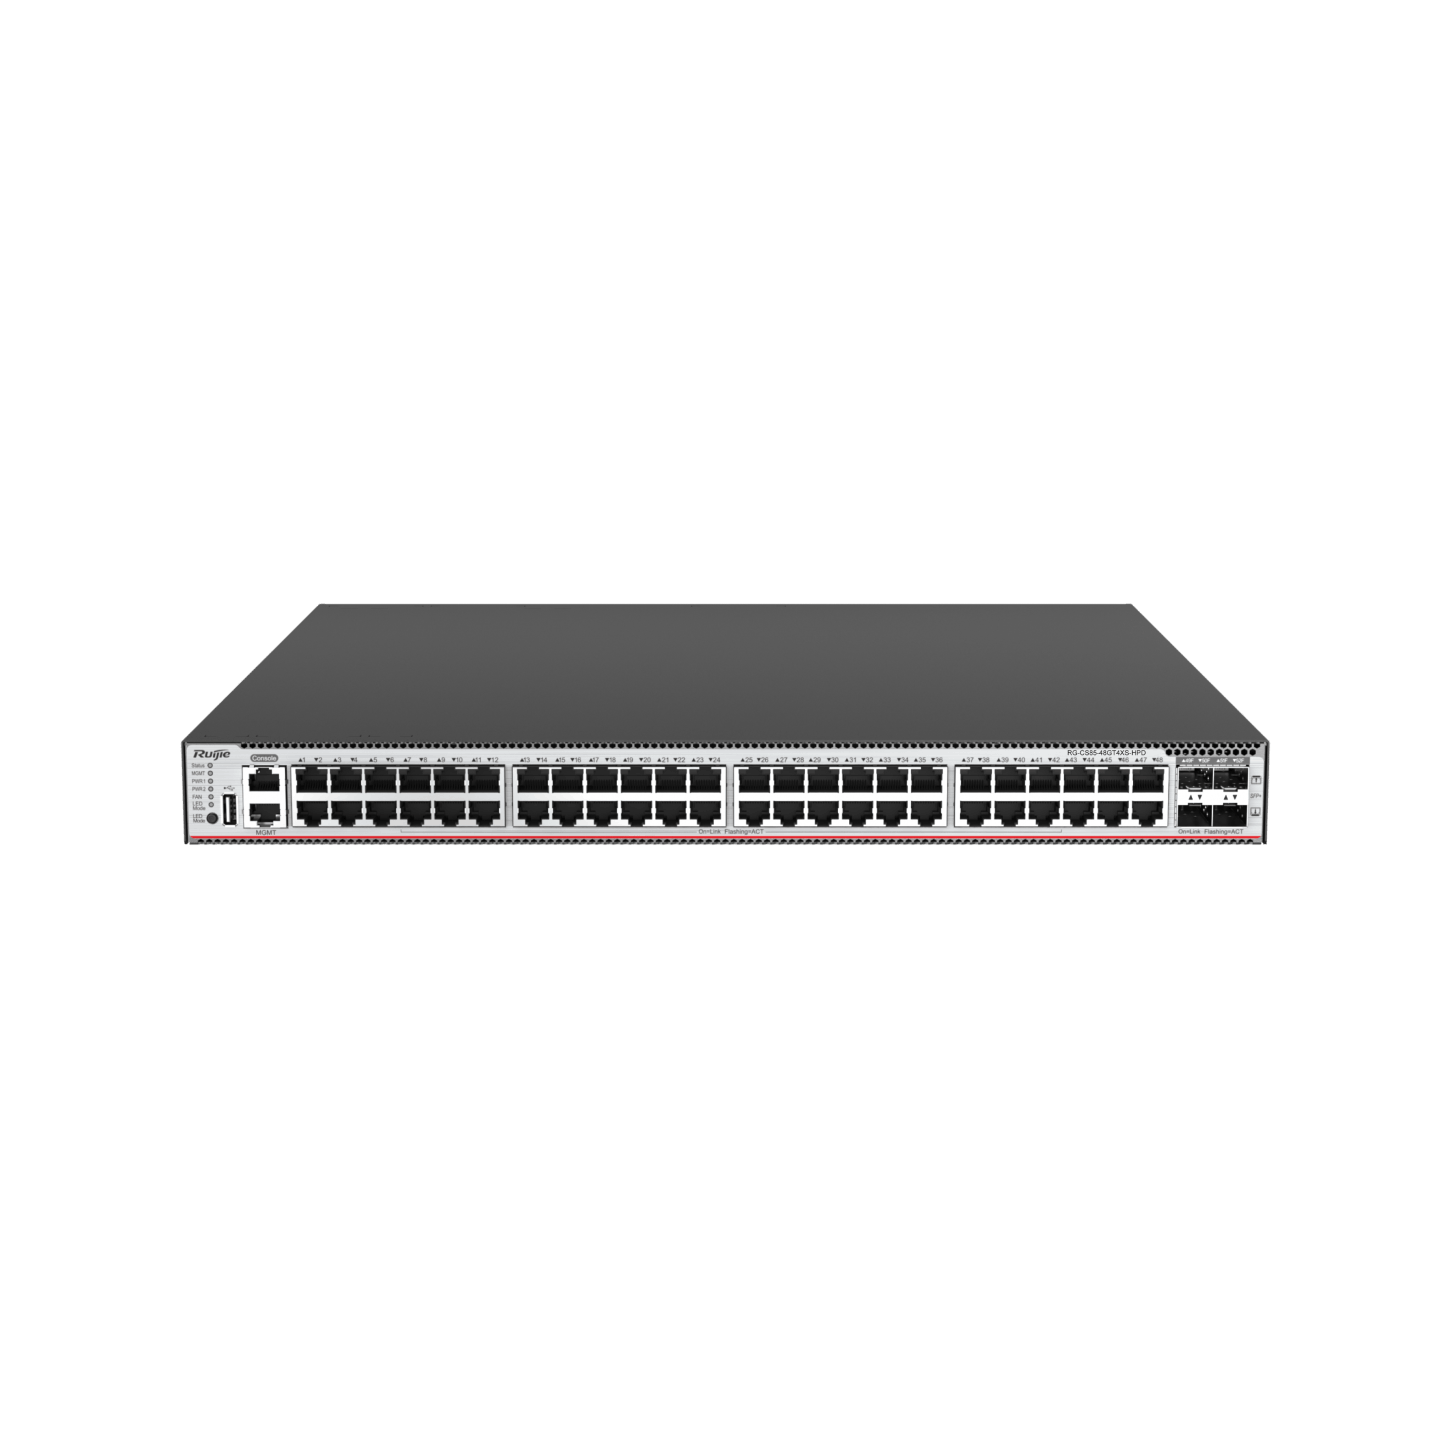 RG-CS85-48GT4XS-HPD 48-Port GE Electrical Layer 3 Enterprise-Class PoE Core or Aggregation Switch, 4 × 10G Uplink Ports